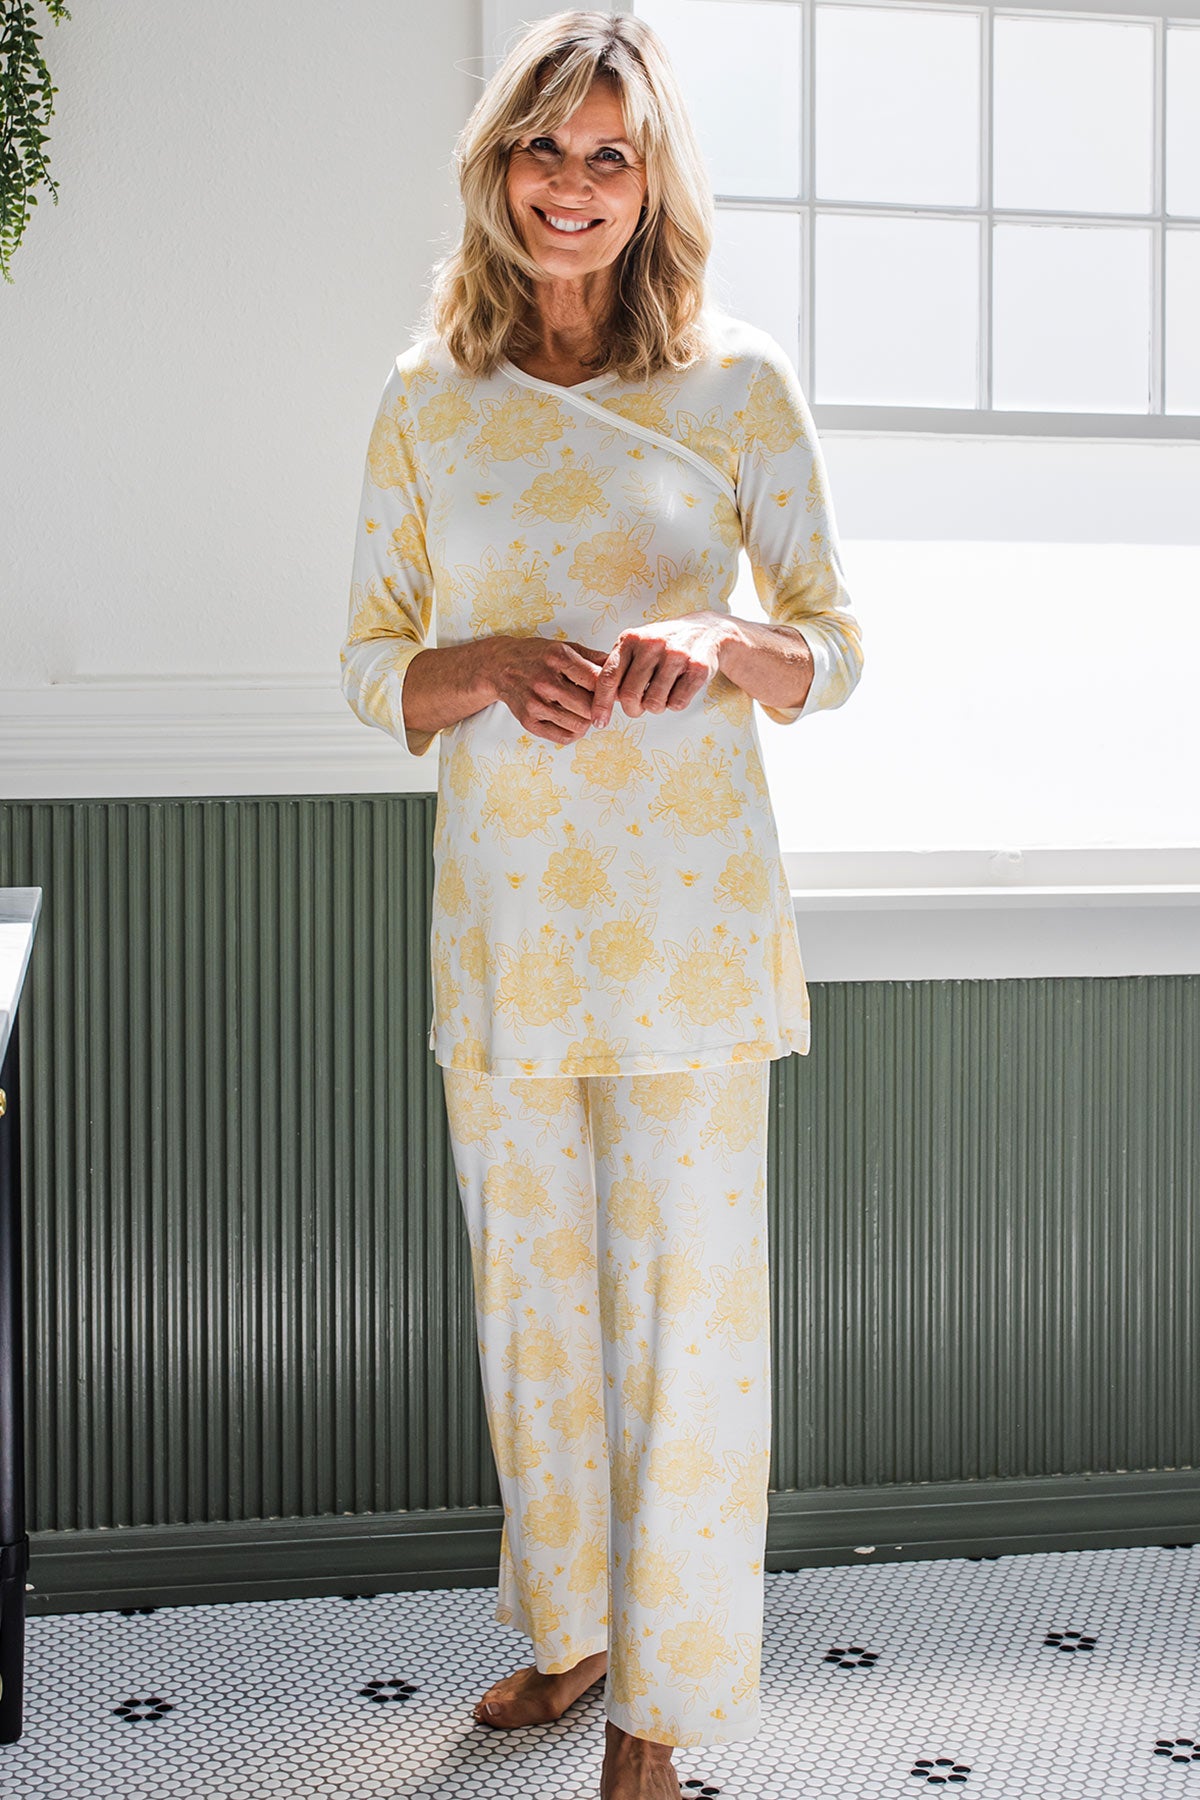 A woman standing with her hands in front of her and smiling, wearing Yala Crossover Front 3/4 Sleeve Bamboo Pajama Set in Honeybee Print